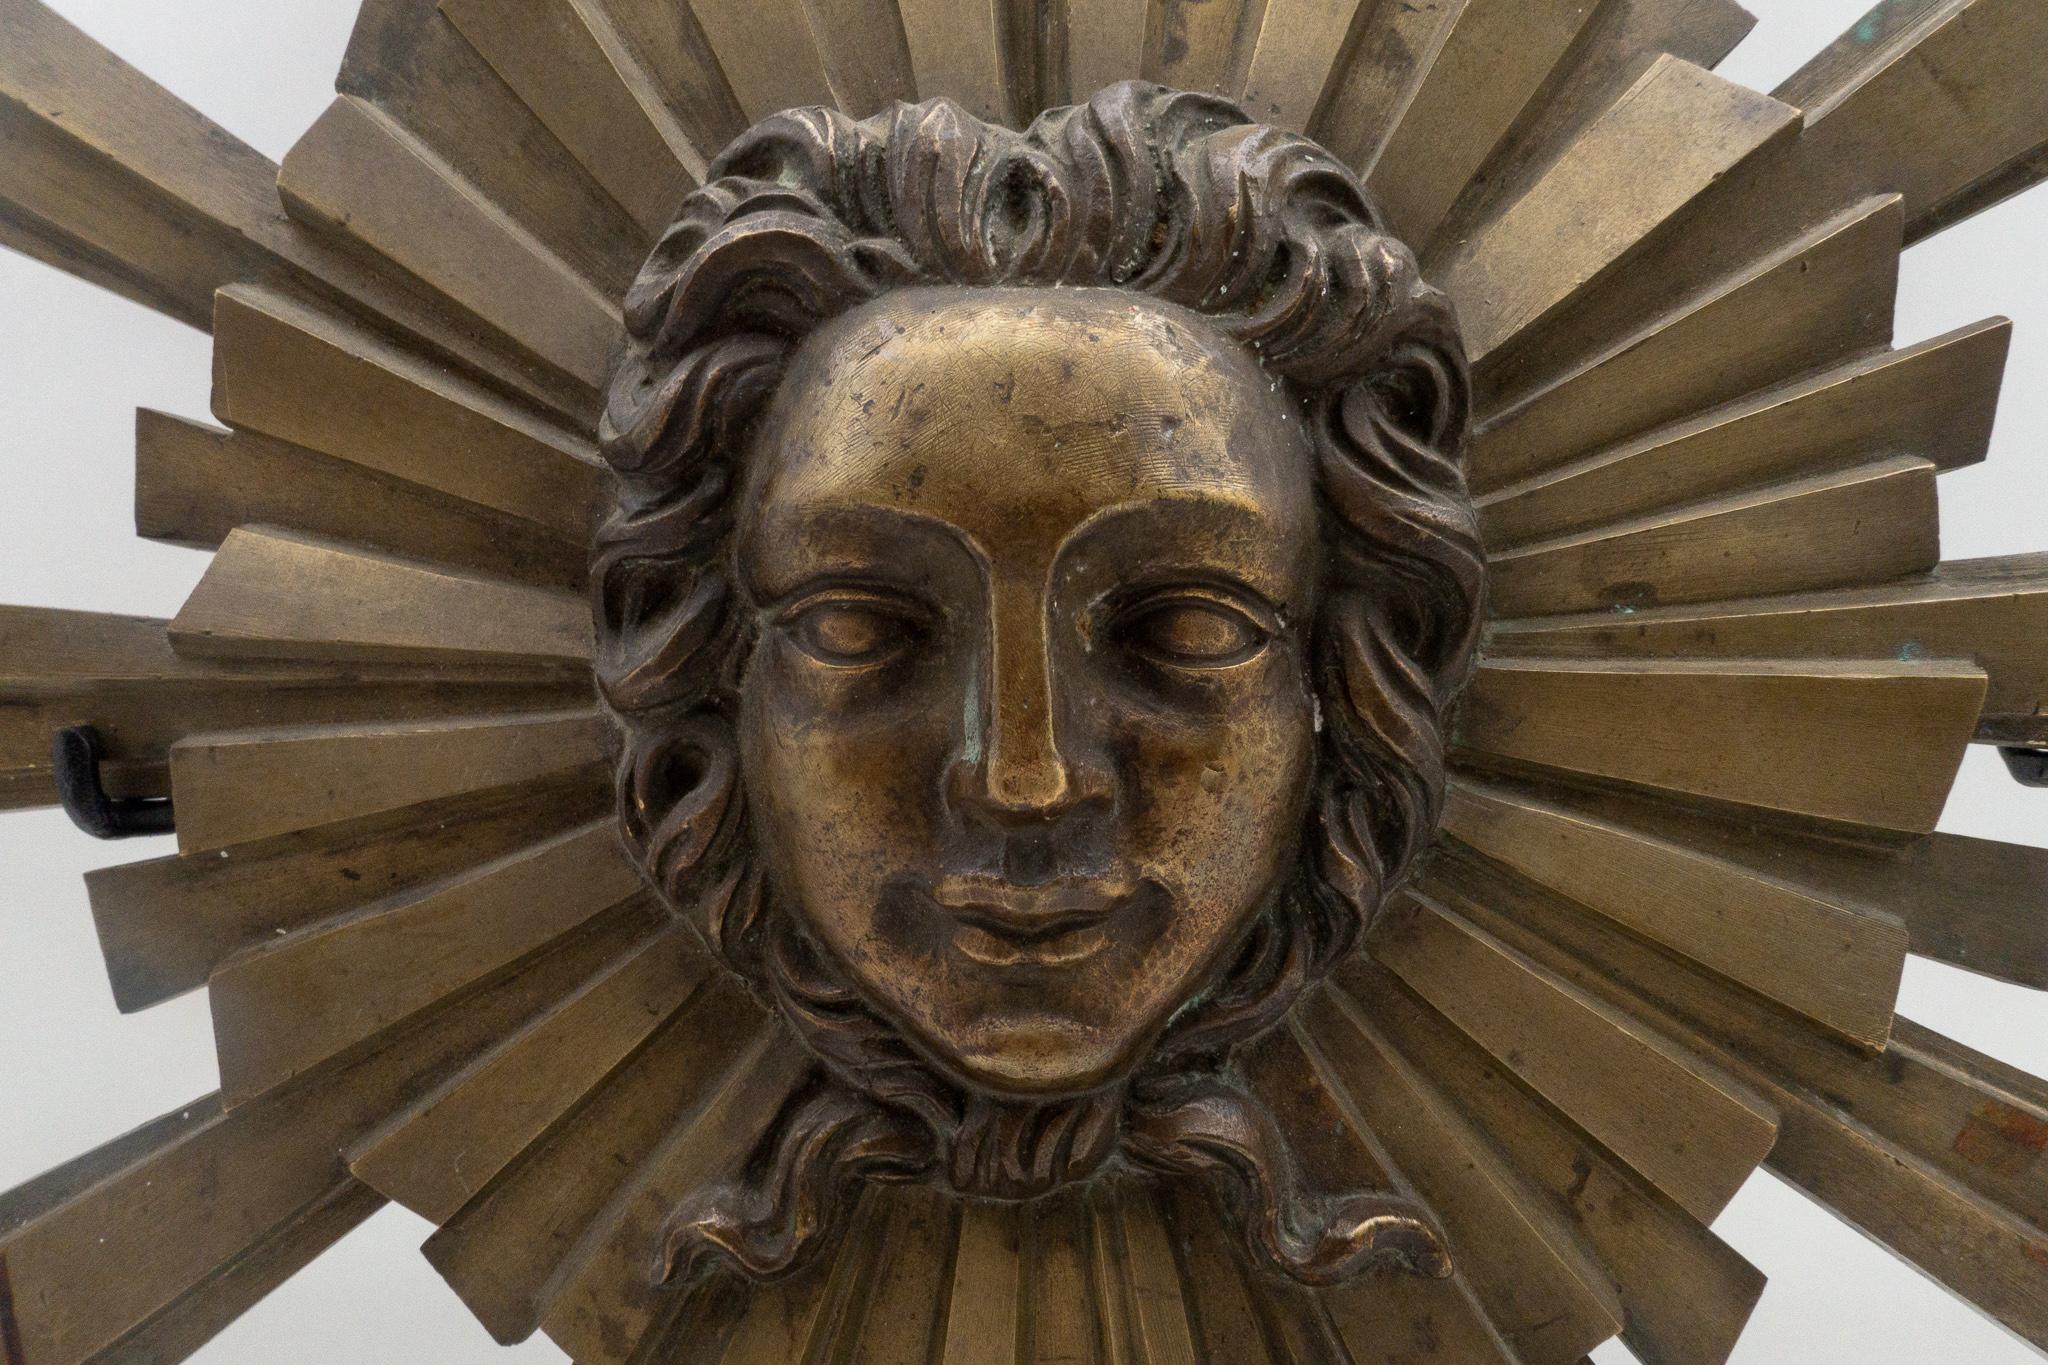 French 1940s large mounted bronze Roi Soleil or Sun King medallion. 

Louis XIV the Sun King (Roi Soleil), was a monarch of the House of Bourbon who reigned as King of France from 1643 until his death in 1715.